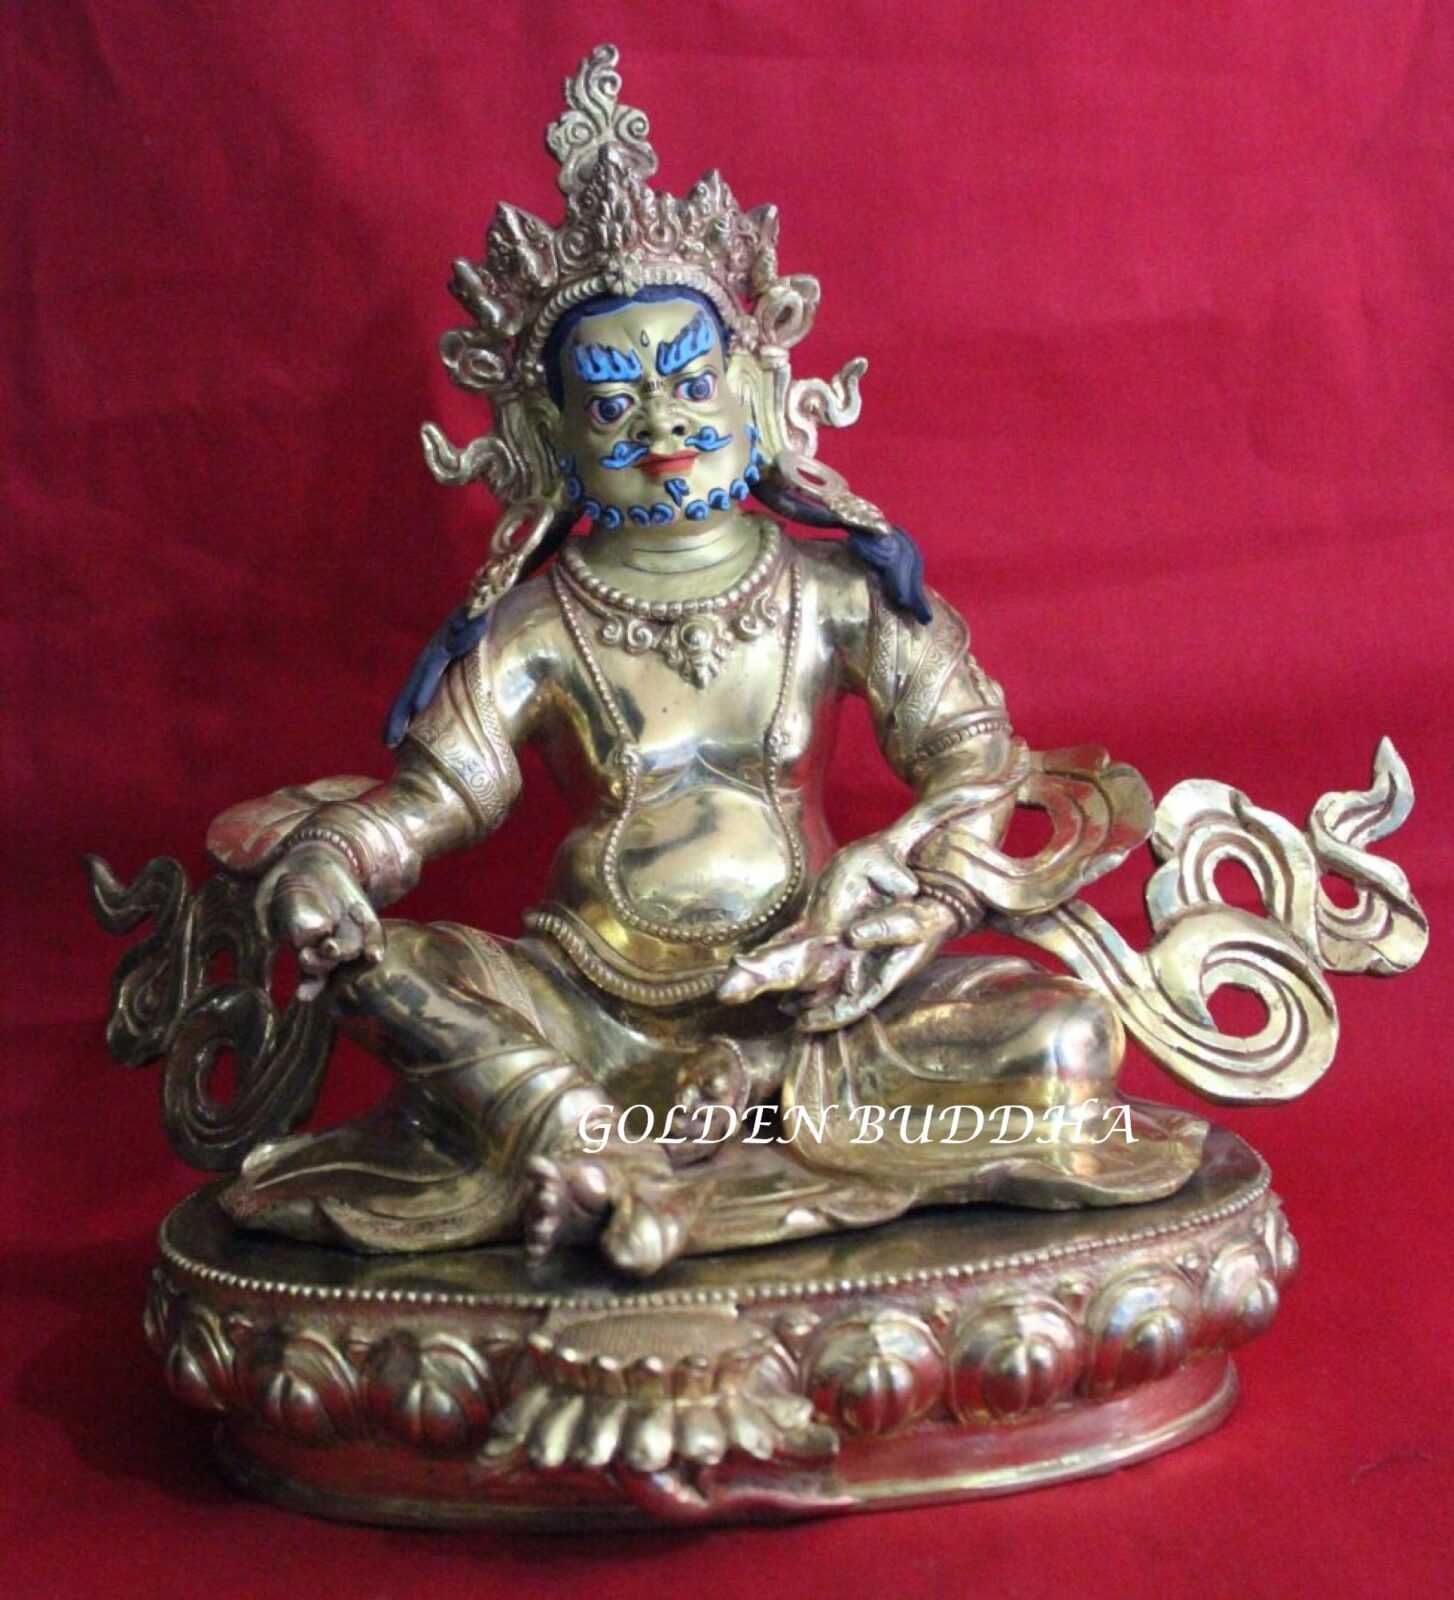 Fully Gold Gilded 12" Lord Kubera Statue, Handmade "God of Wealth", Fire Gilded 24k Gold - Front